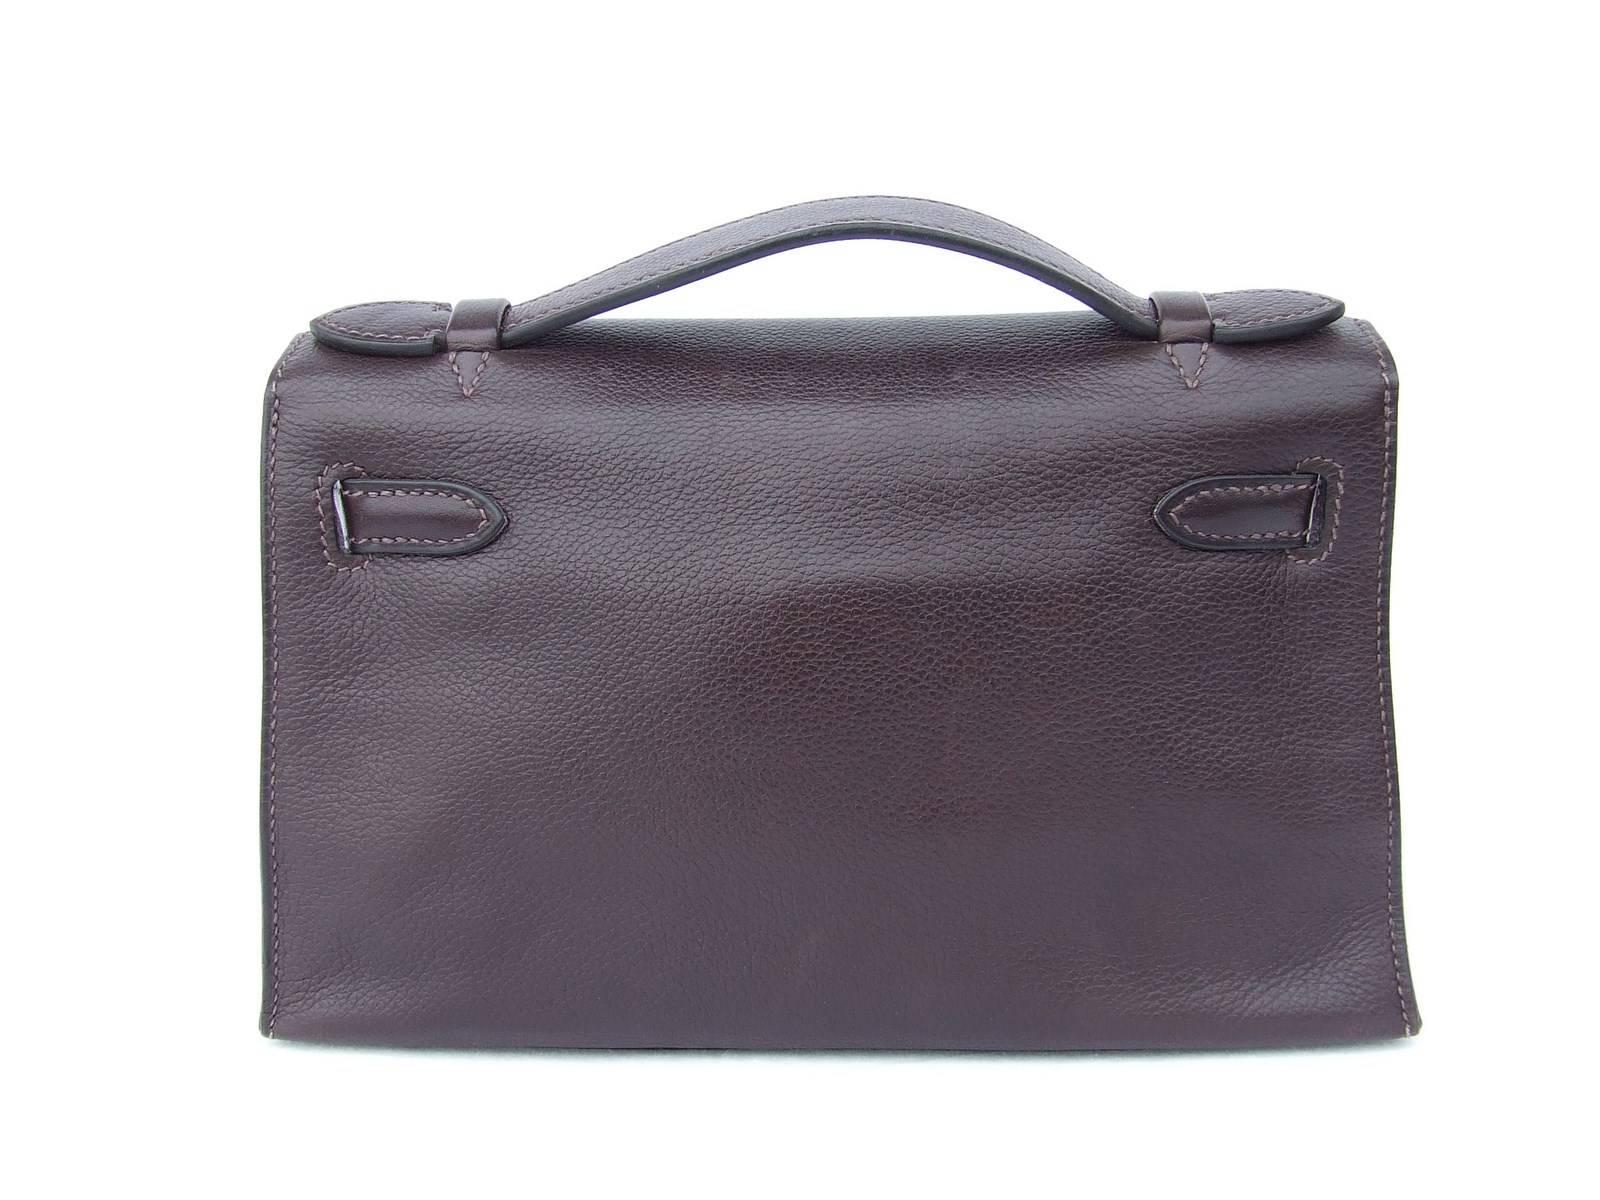 Beautiful Authentic Hermes Pochette

"KELLY"

Made in France

Stamp H in a square 

Made of Evergrain Leather and Gold Hardware

Colorway: Havane (Brown)

Fully Lined with Havane Evergrain Leather

"HERMES PARIS MADE IN FRANCE"